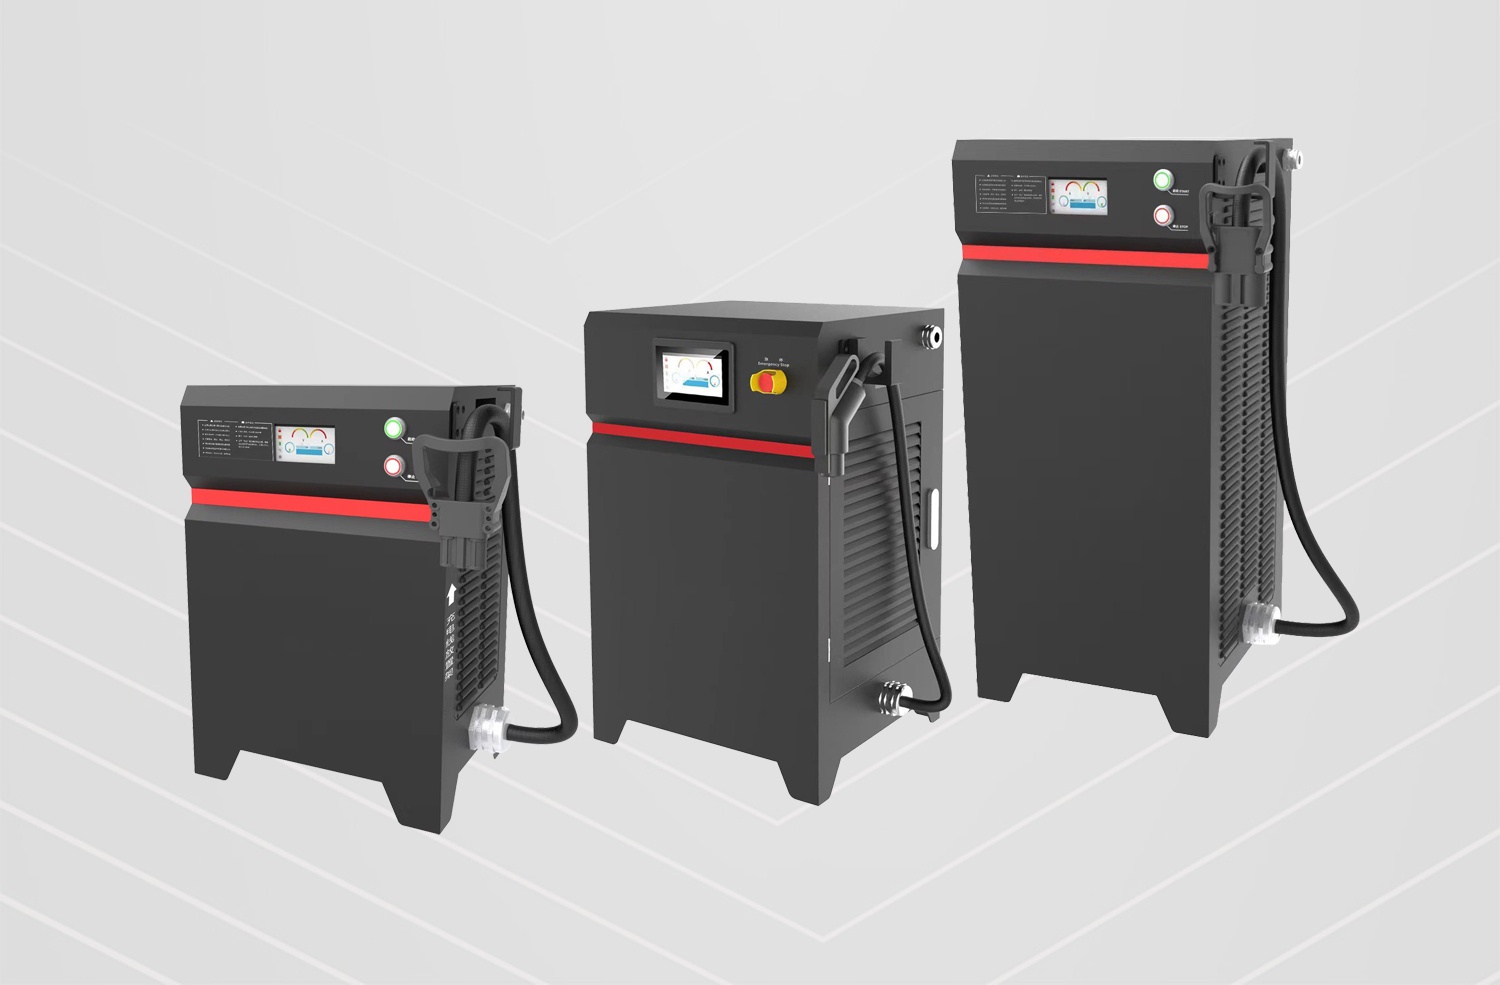 IMPROVE smart forklift LiFePO4 battery charger